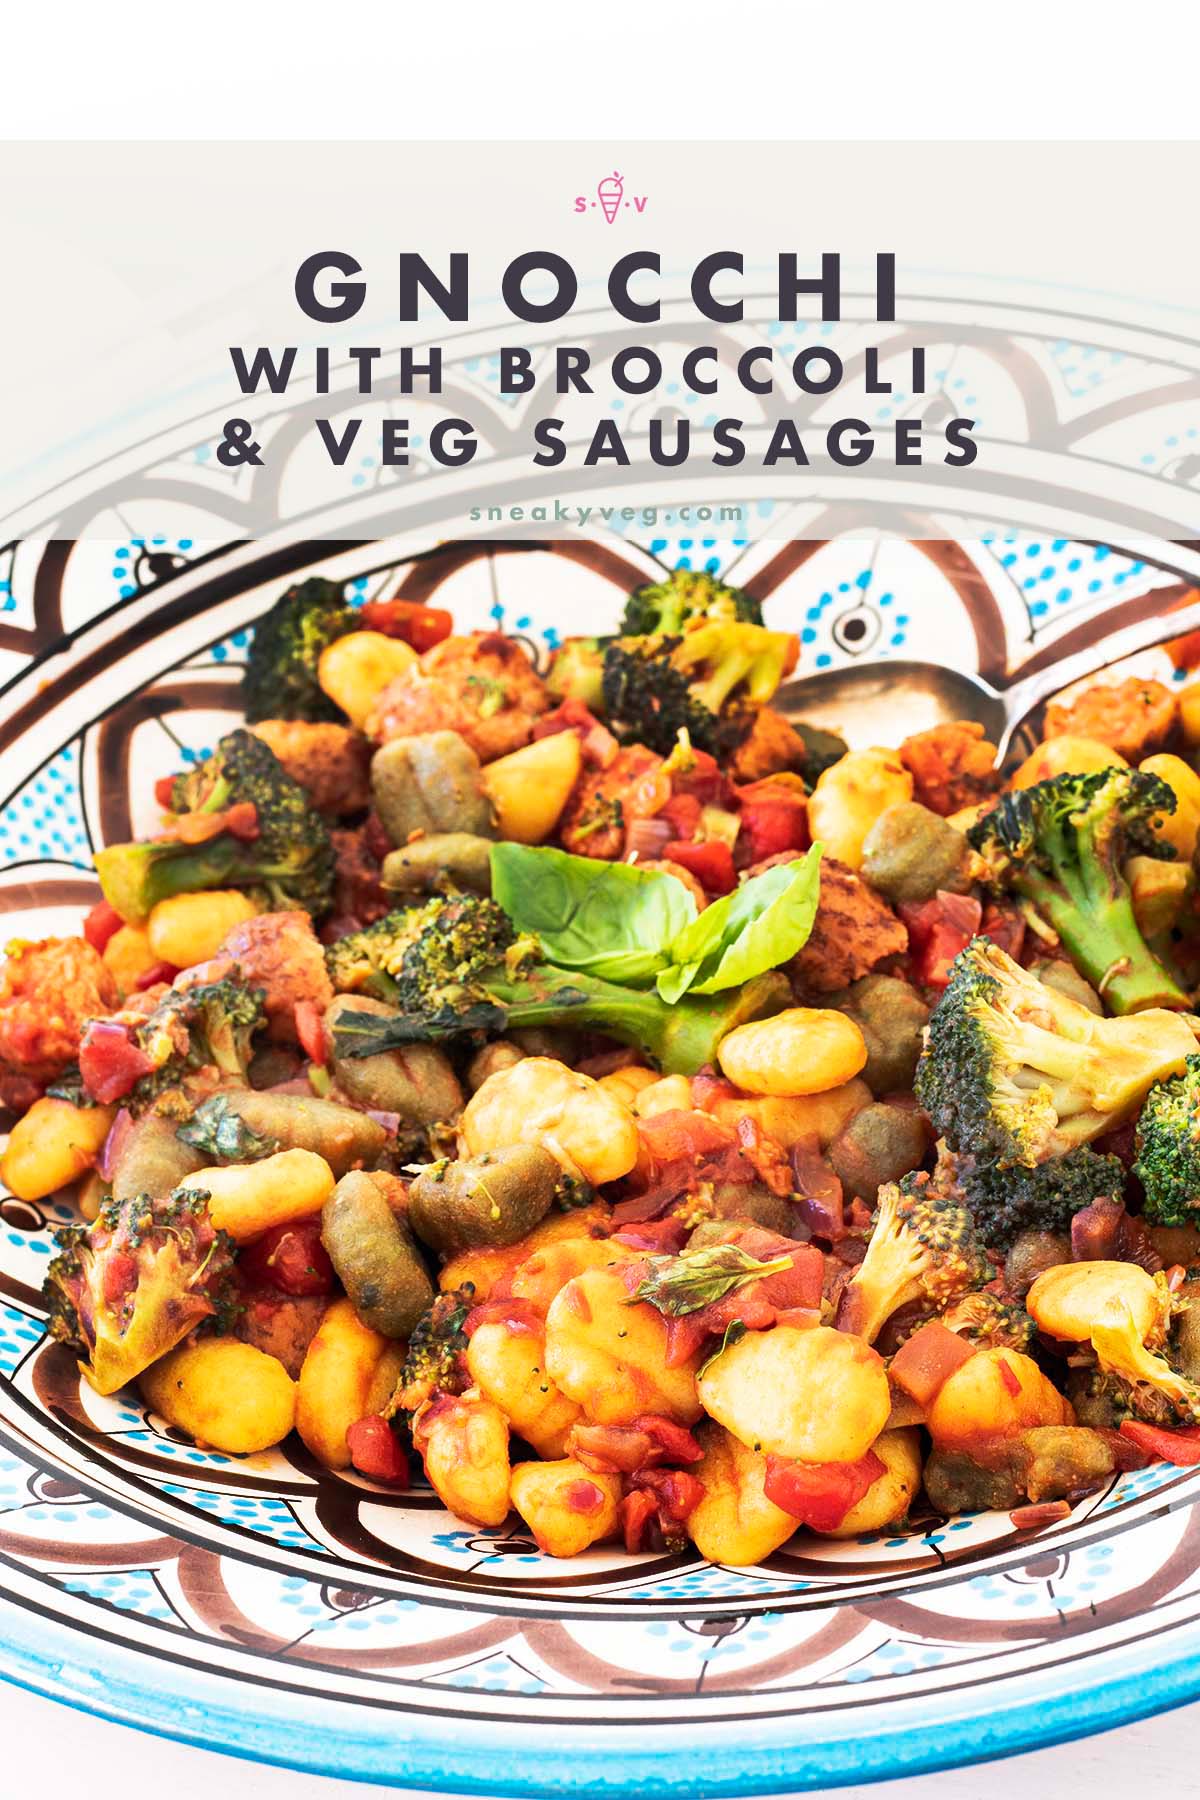 gnocchi with broccoli and vegetarian sausages in blue and white bowl